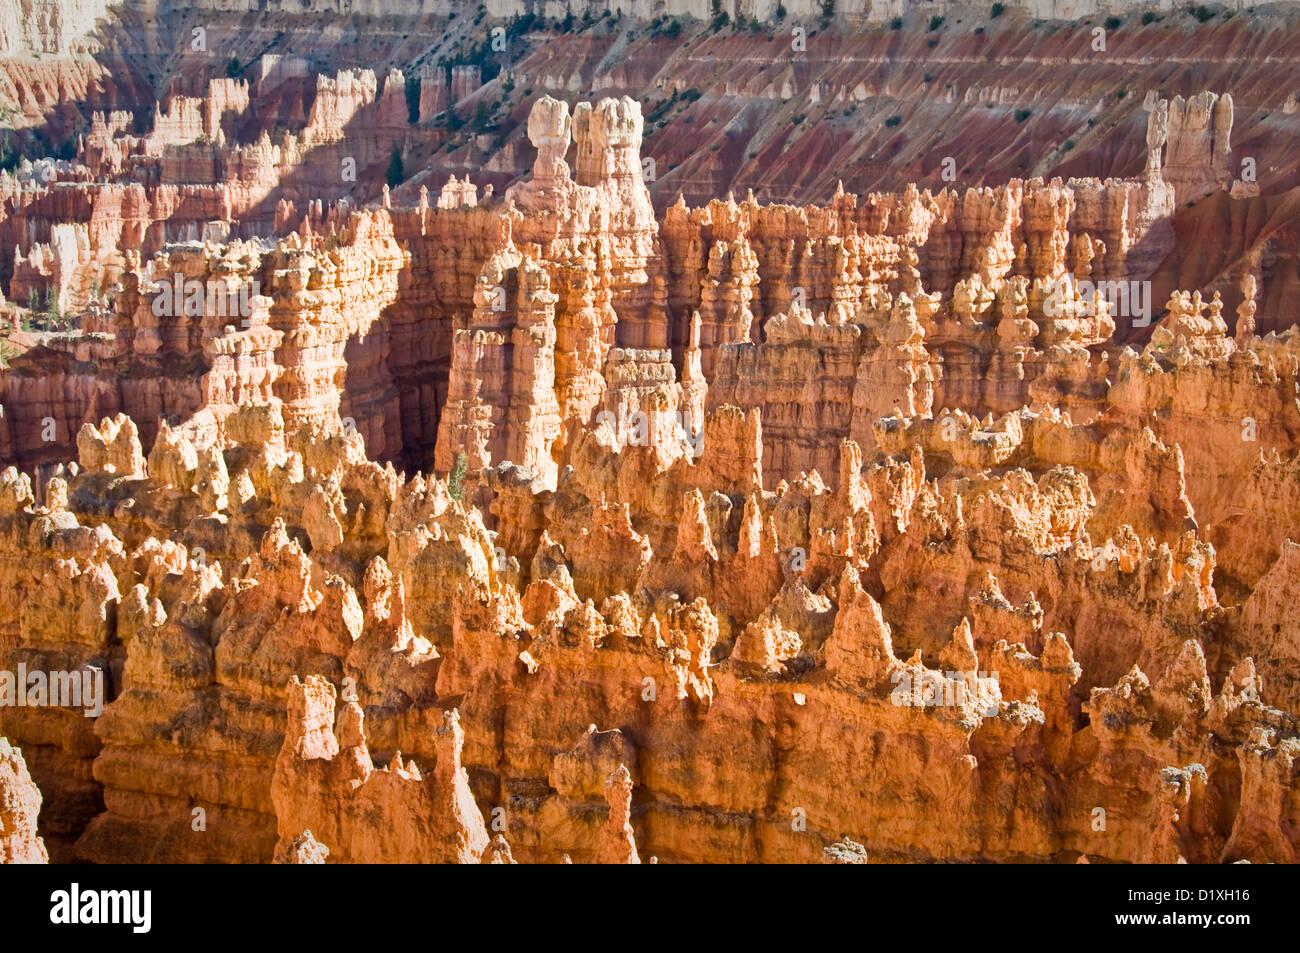 Sunset point - Bryce Canyon National Park, Utah, USA Banque D'Images